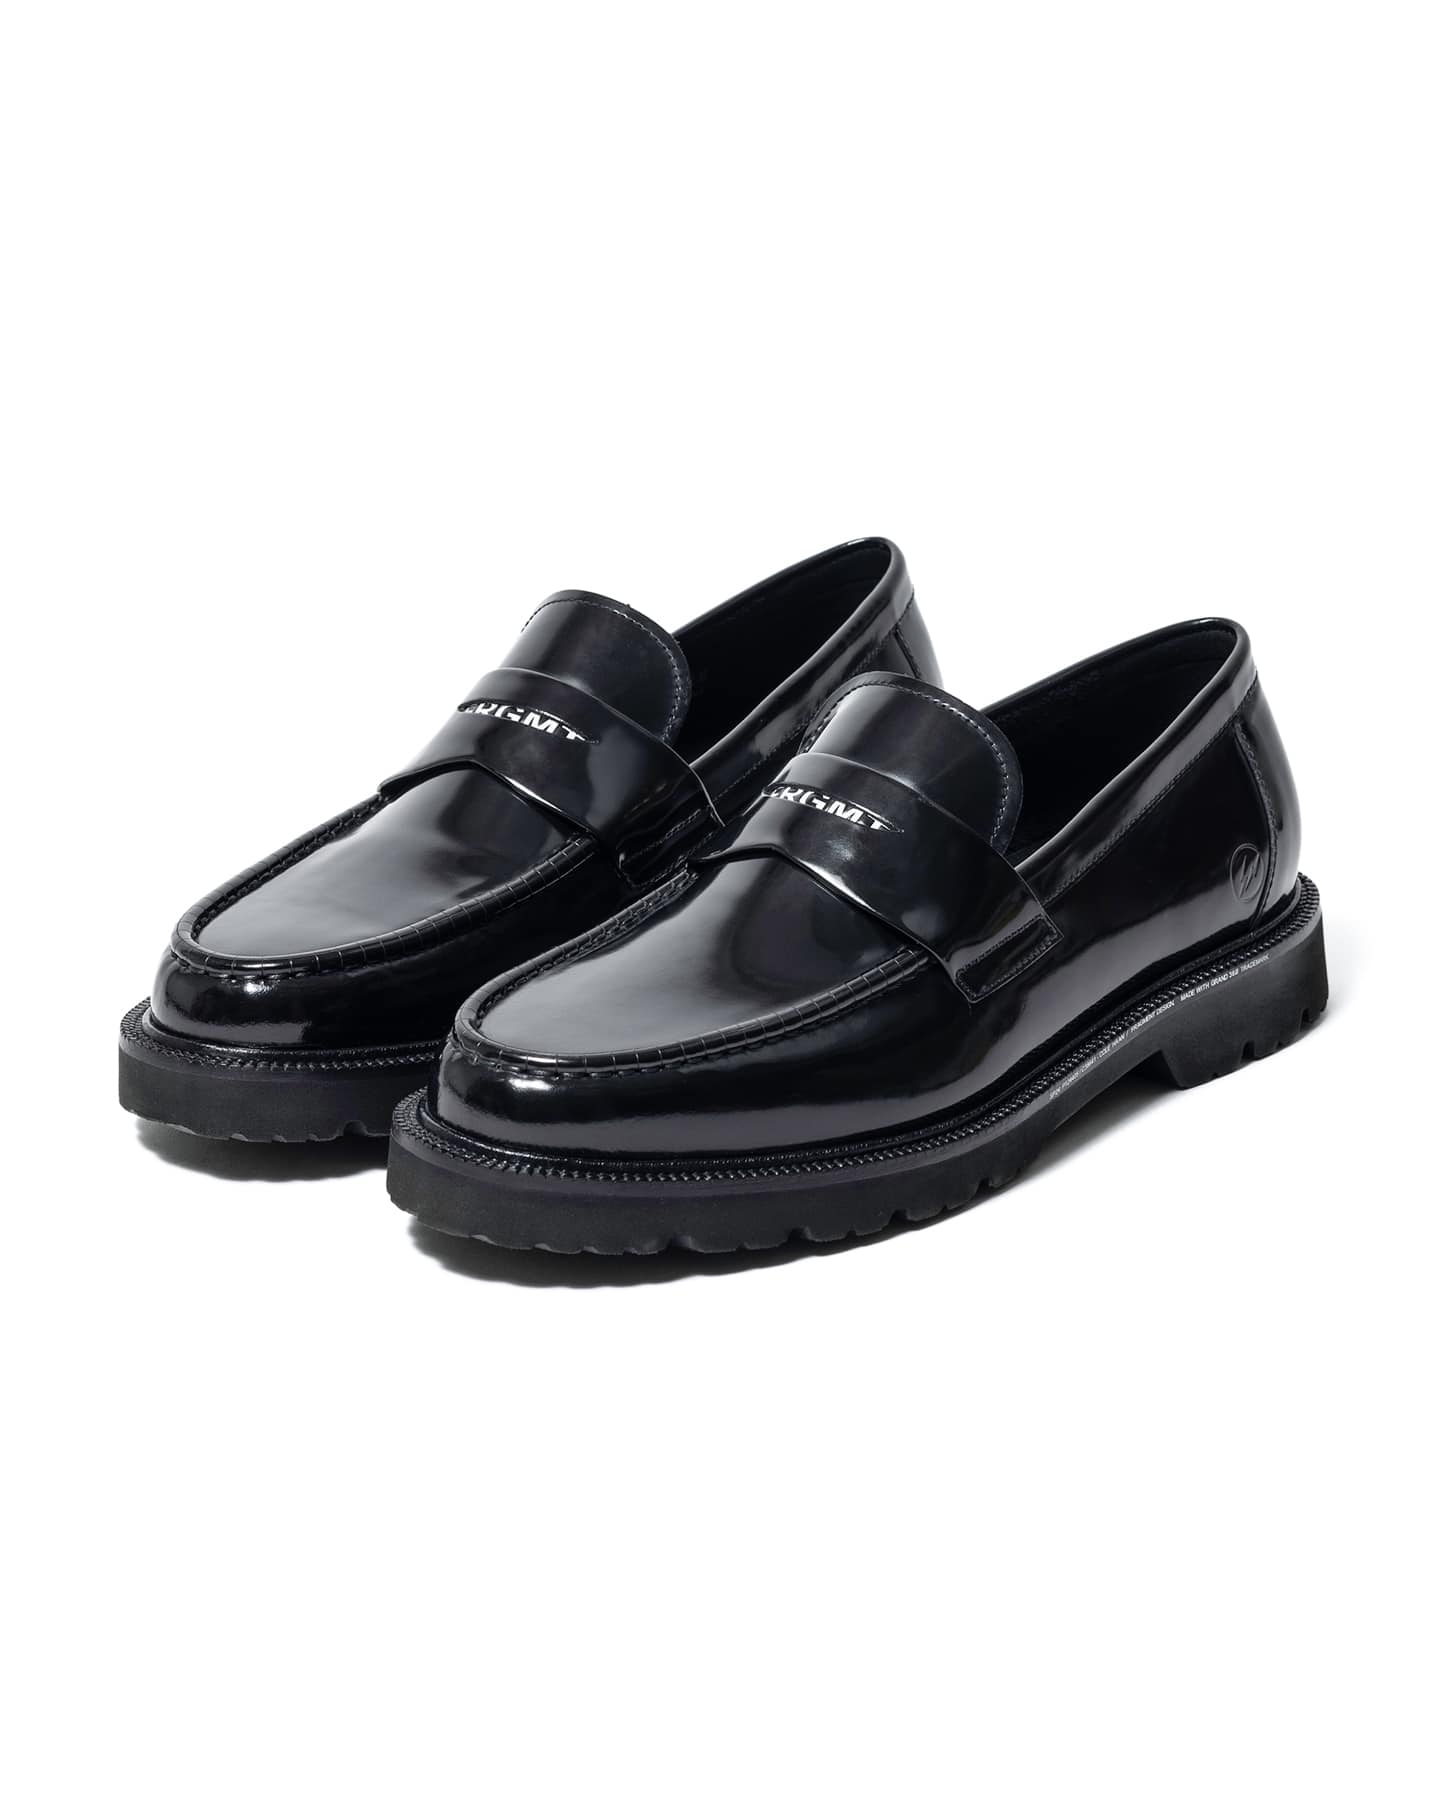 Fragment COLE HAAN Classics Loaferメンズ